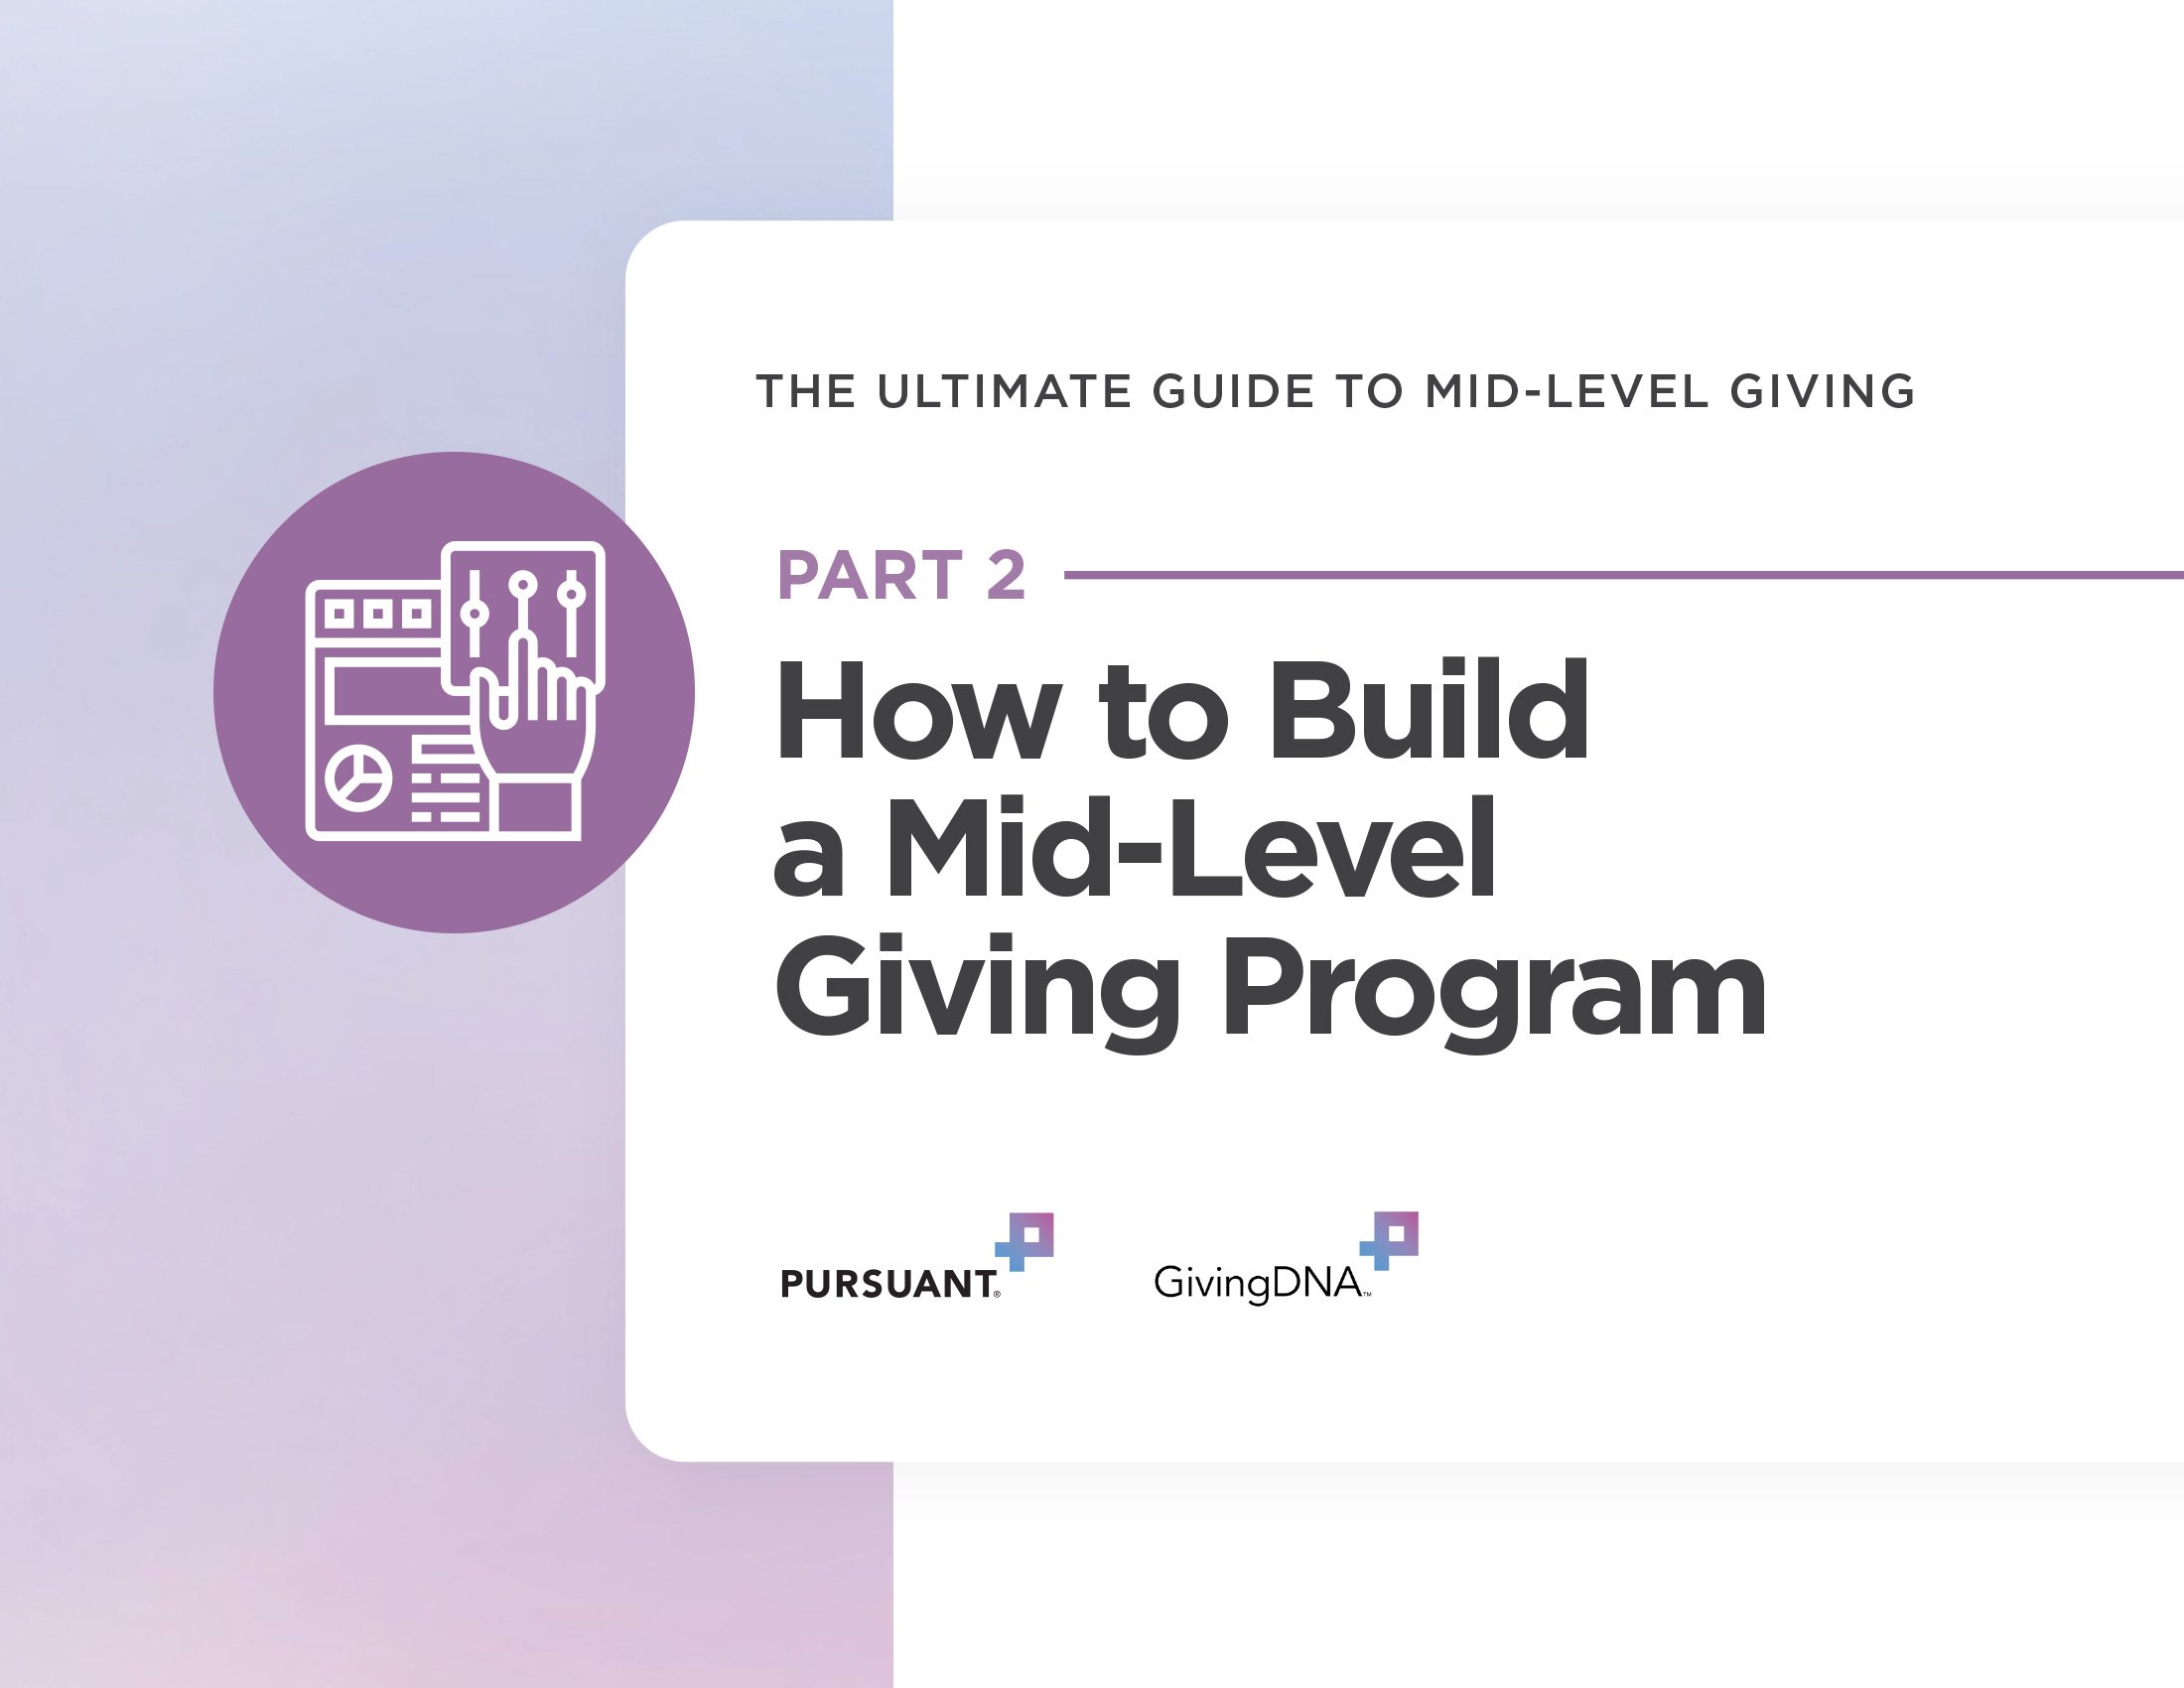 The Ultimate Guide to Mid-Level Giving Part 2: How to Build a Mid-Level Giving Program